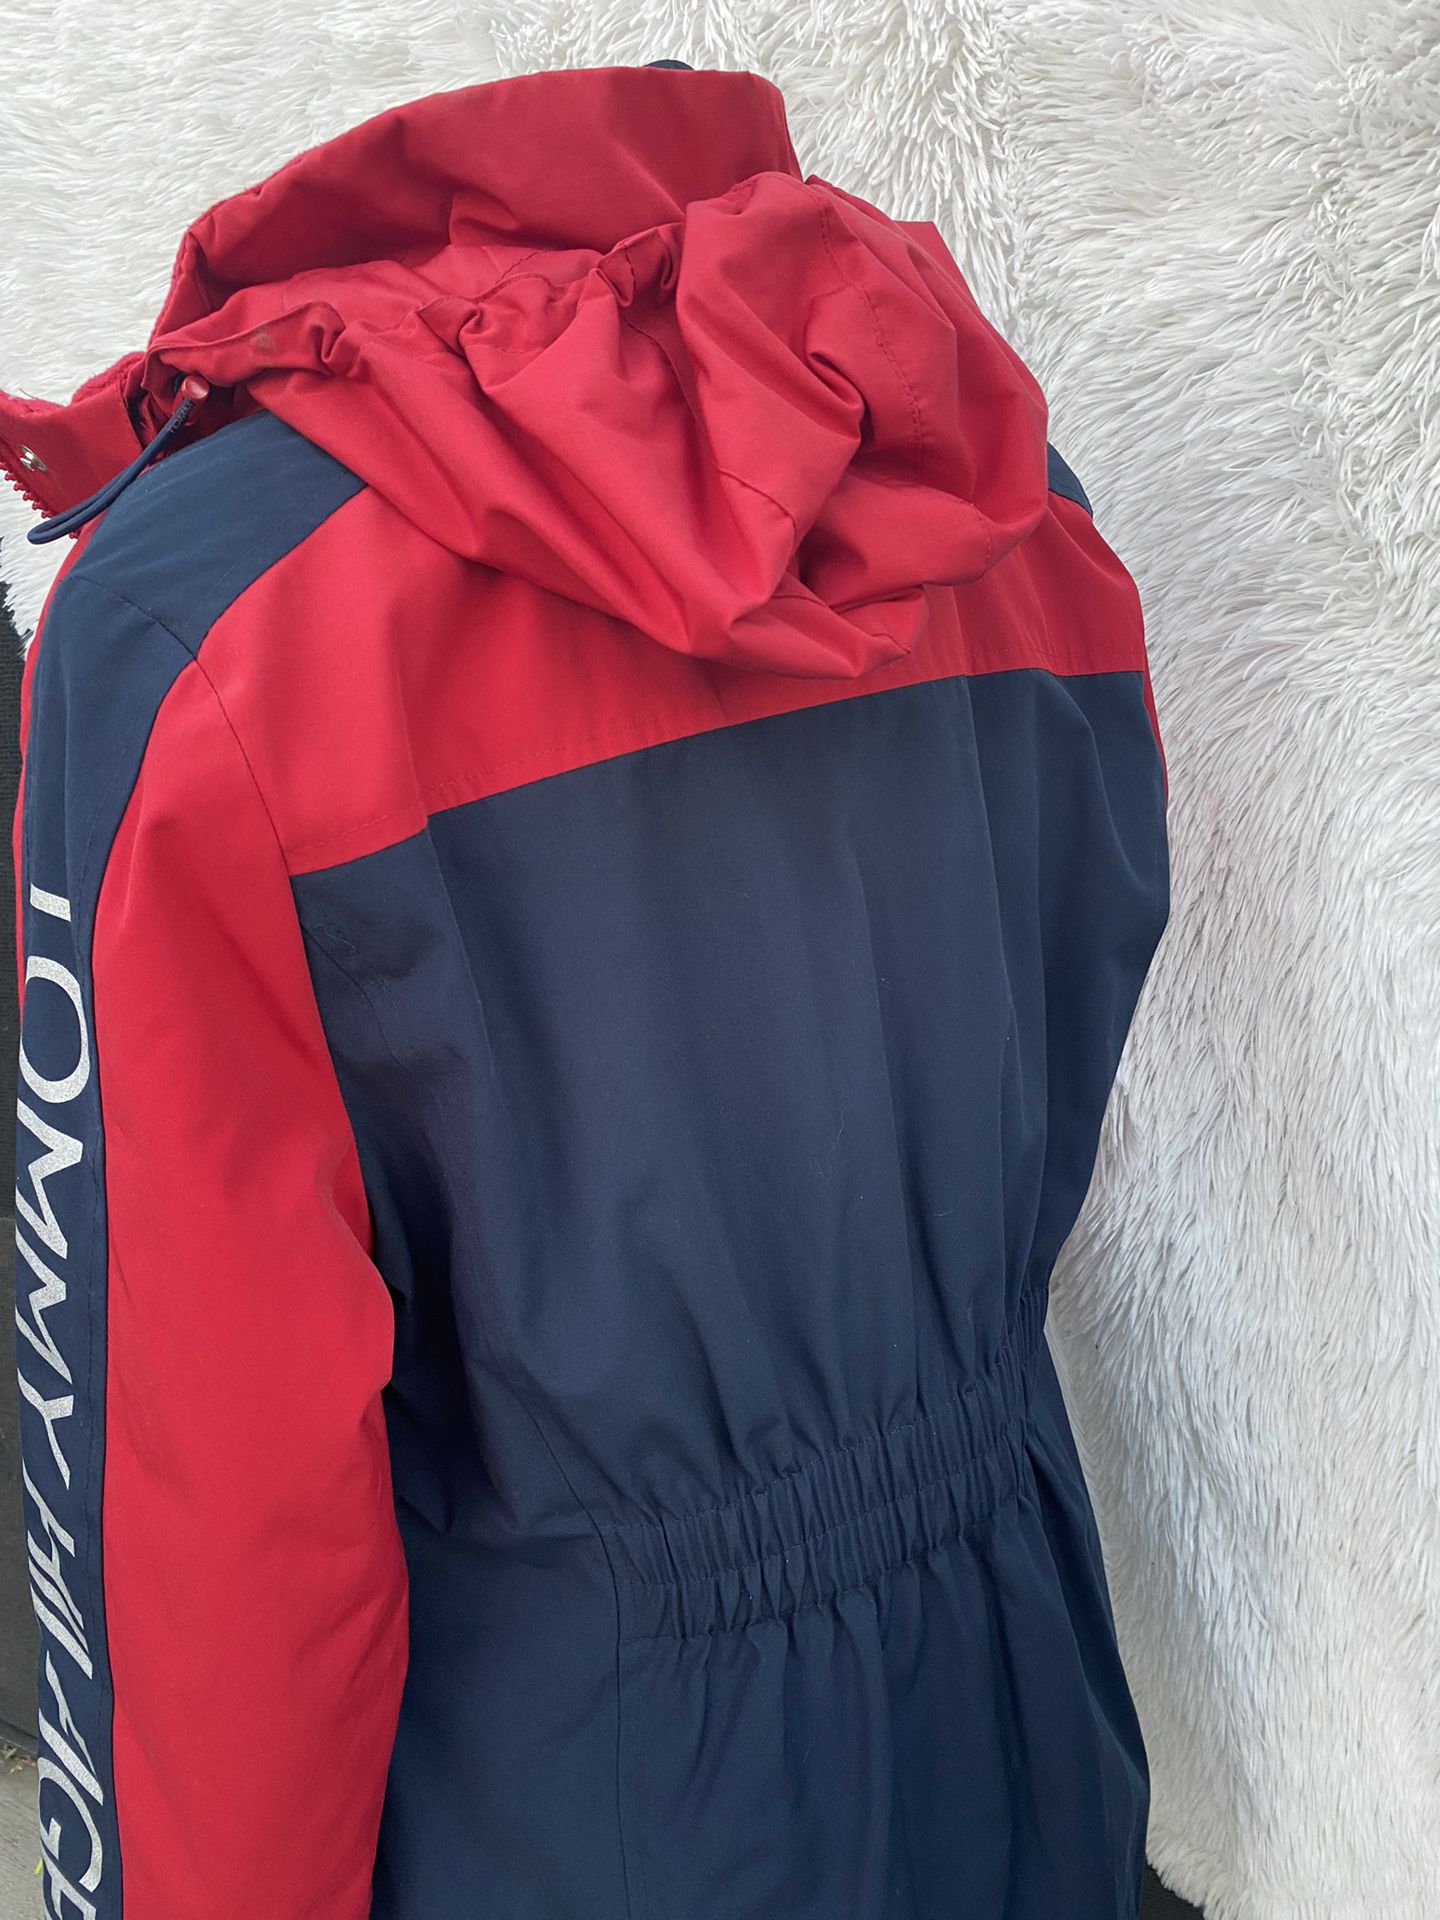 New - Tommy Hilfiger 3-1 Jacket In Size Small